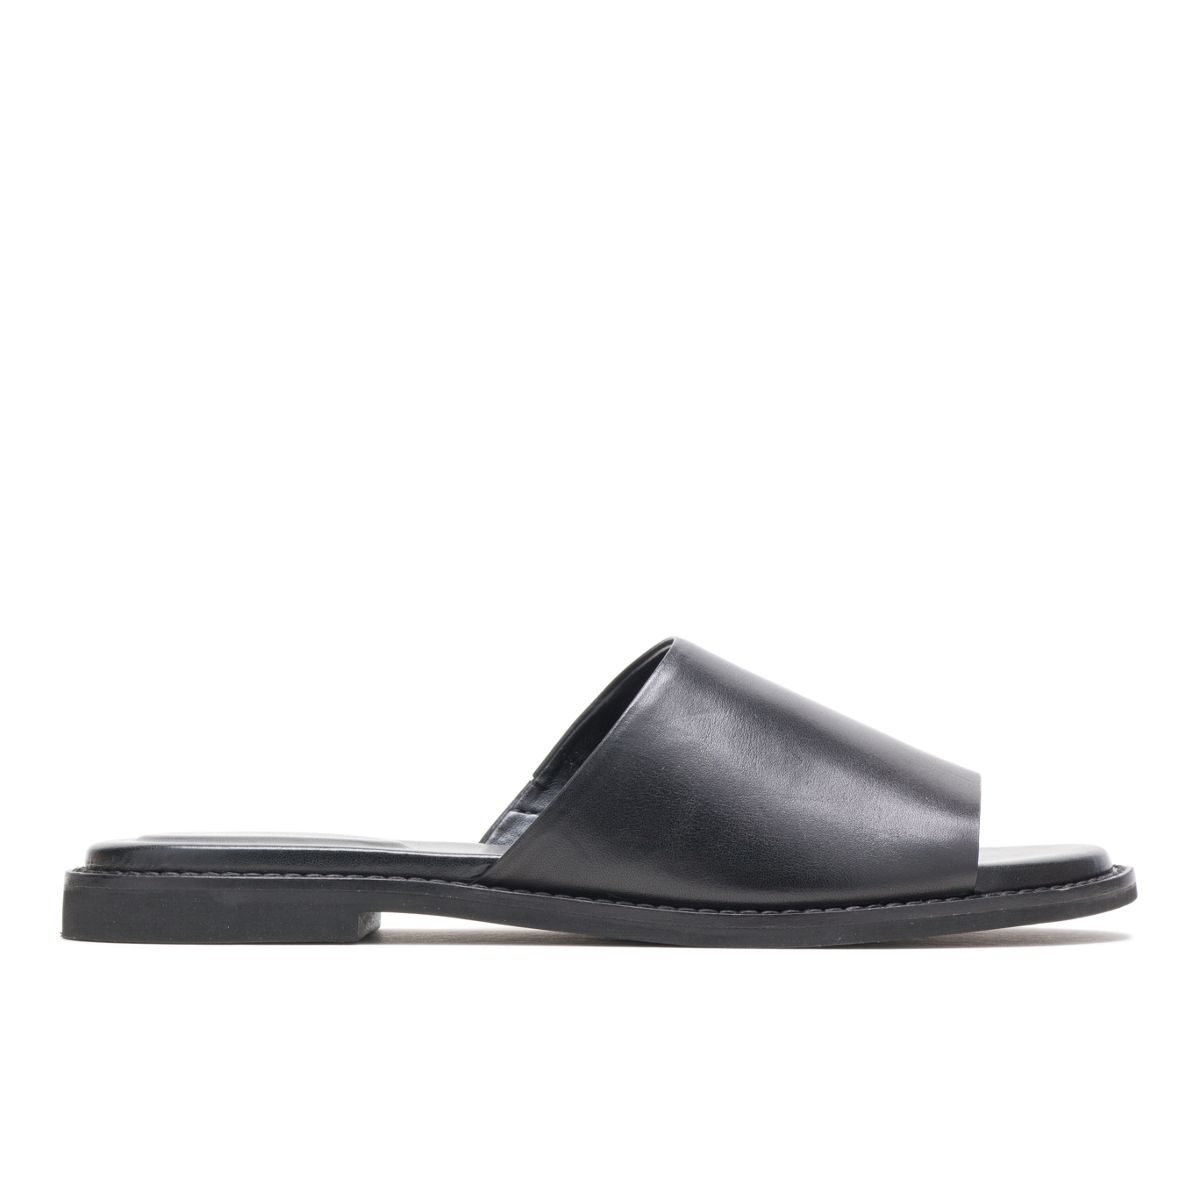 hush puppies leather slippers